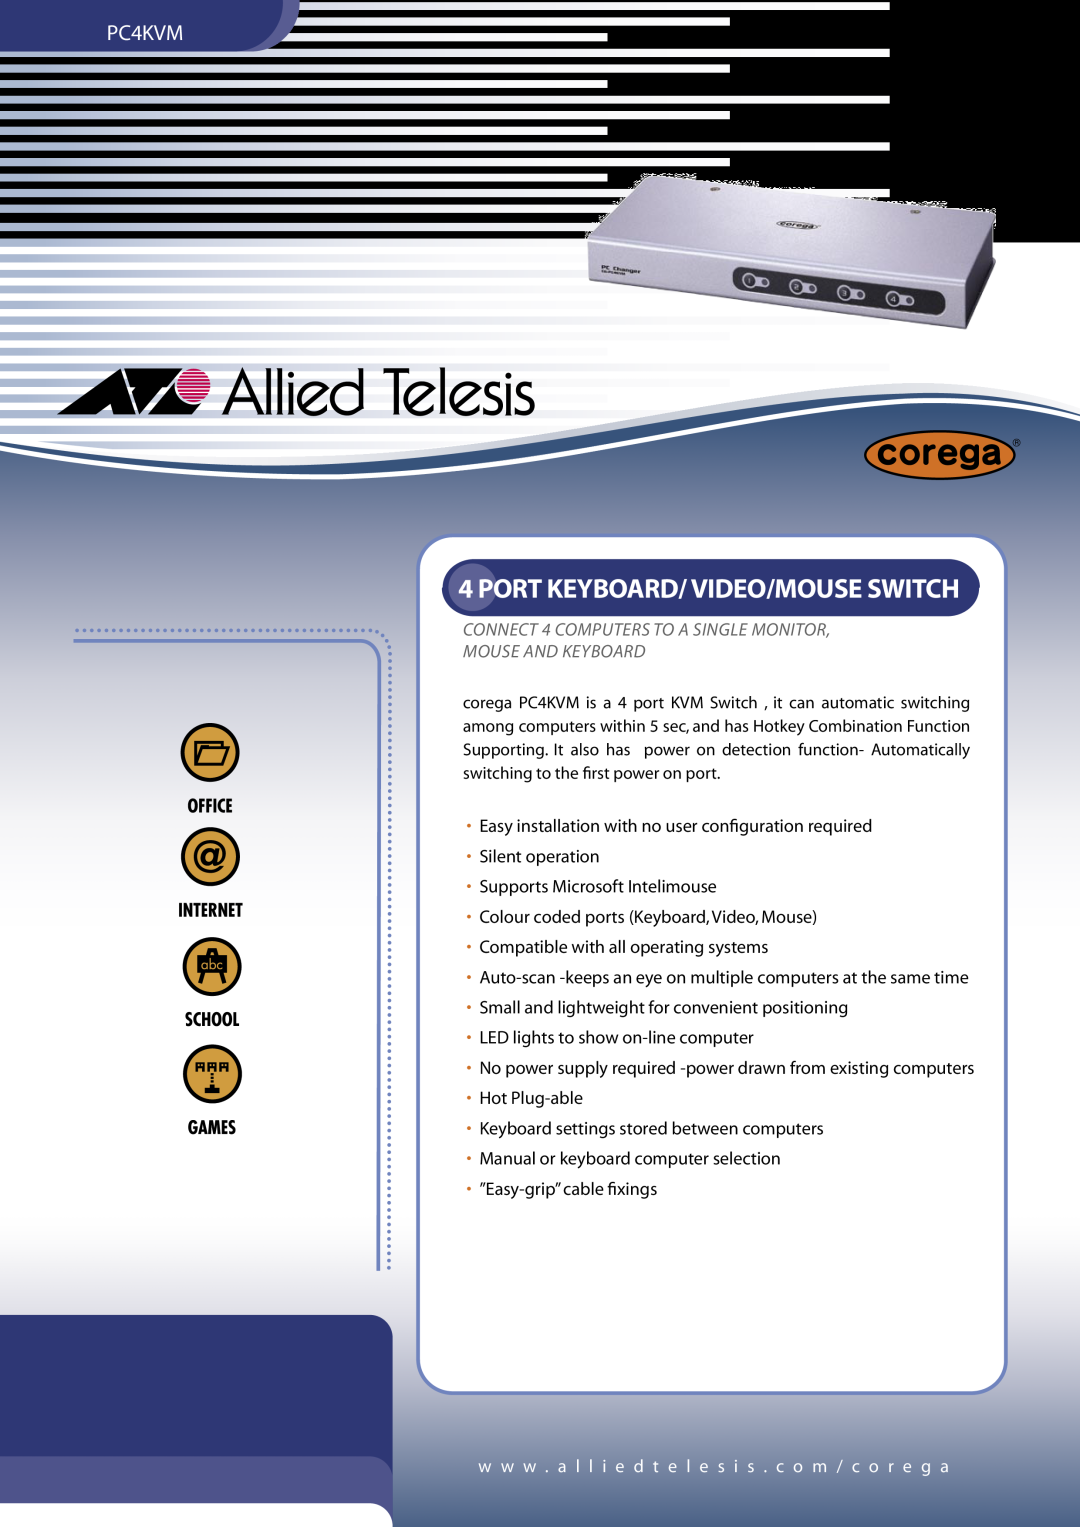 Allied Telesis PC4KVM manual w w w . a l l i e d t e l e s i s . c o m / c o r e g a, Port Keyboard/ Video/Mouse Switch 